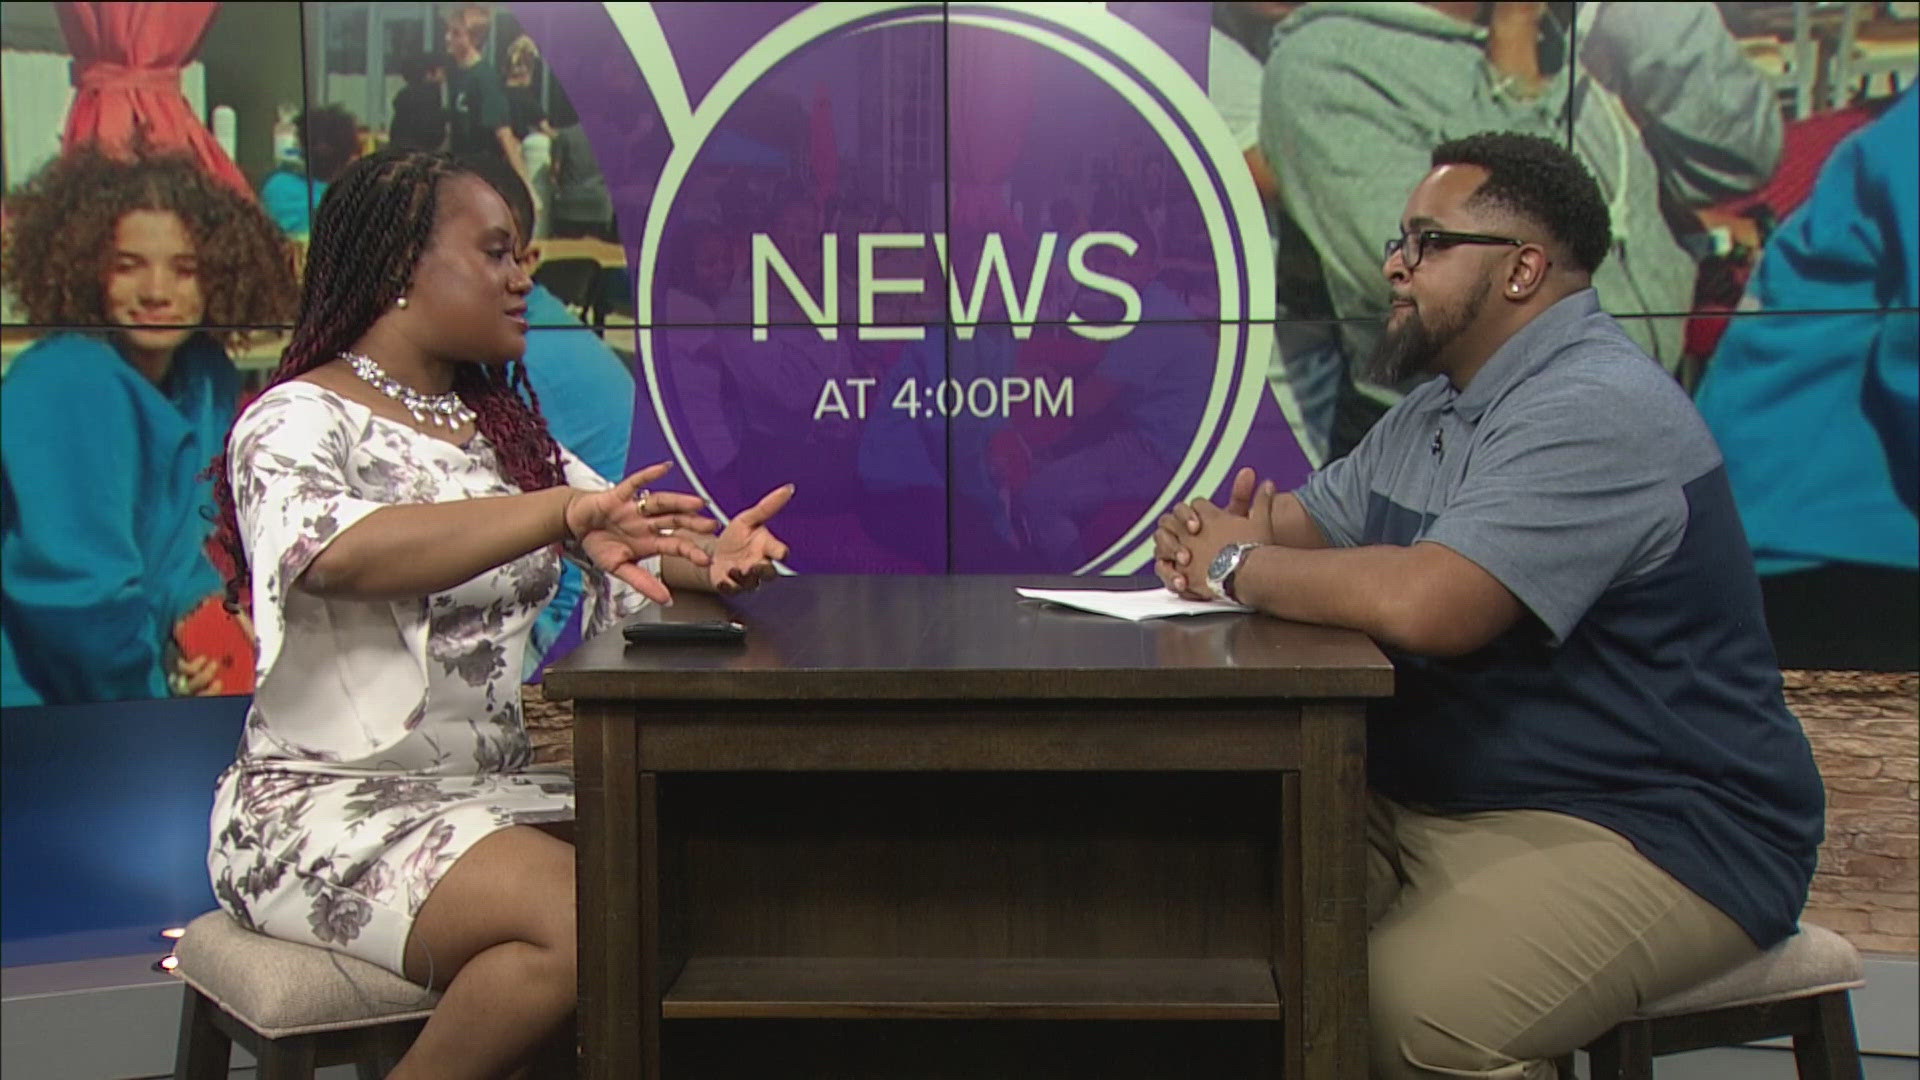 Walter Johnson with the west Toledo YMCA talks with TaTiana Cash about the program and how people can take part.